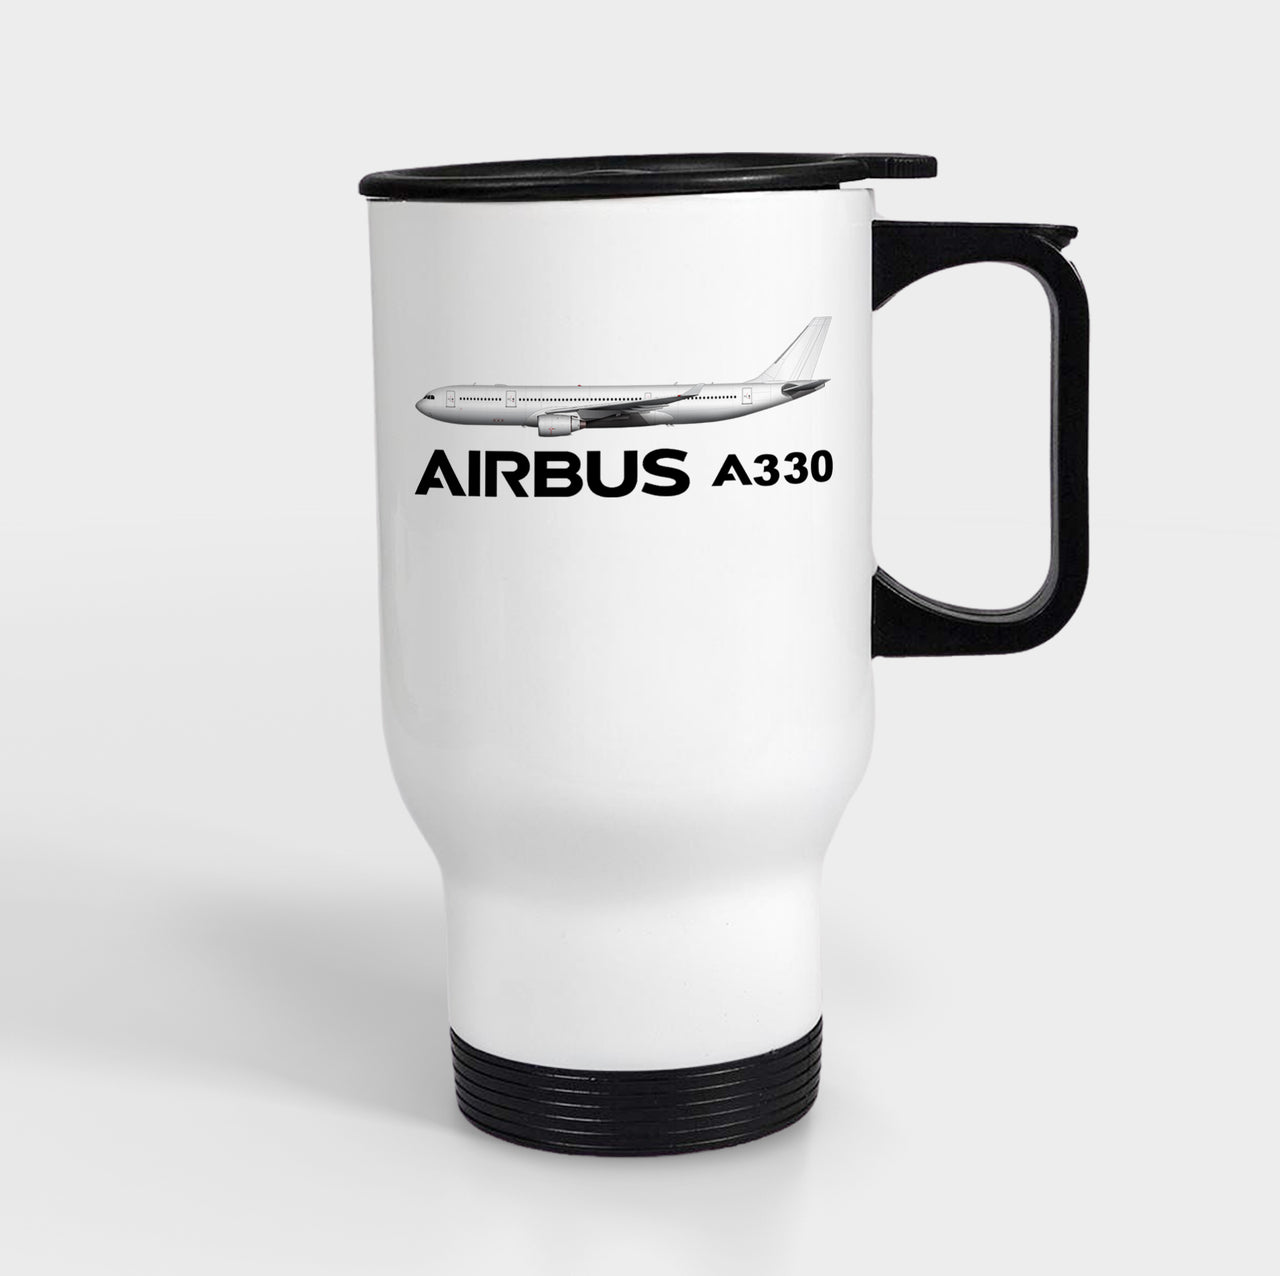 The Airbus A330 Designed Travel Mugs (With Holder)